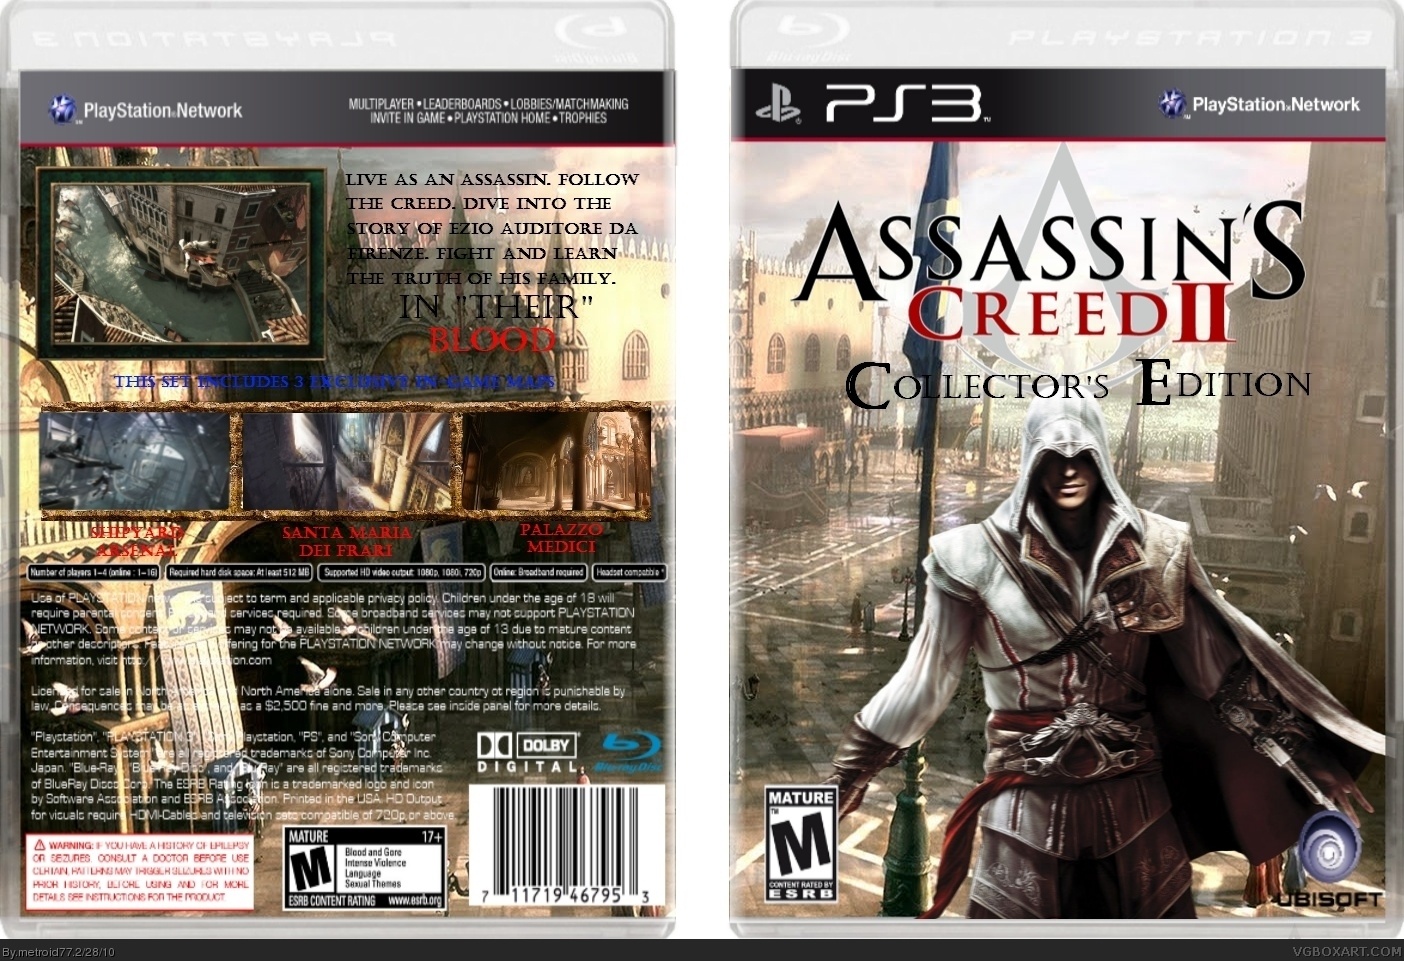 Assassins creed все части список. Assassin's Creed 2 на ps3 диск. Диск ассасин Крид 2 ps3. Assassin's Creed 2 обложка на ps3. Assassin’s Creed II обложка ps3.